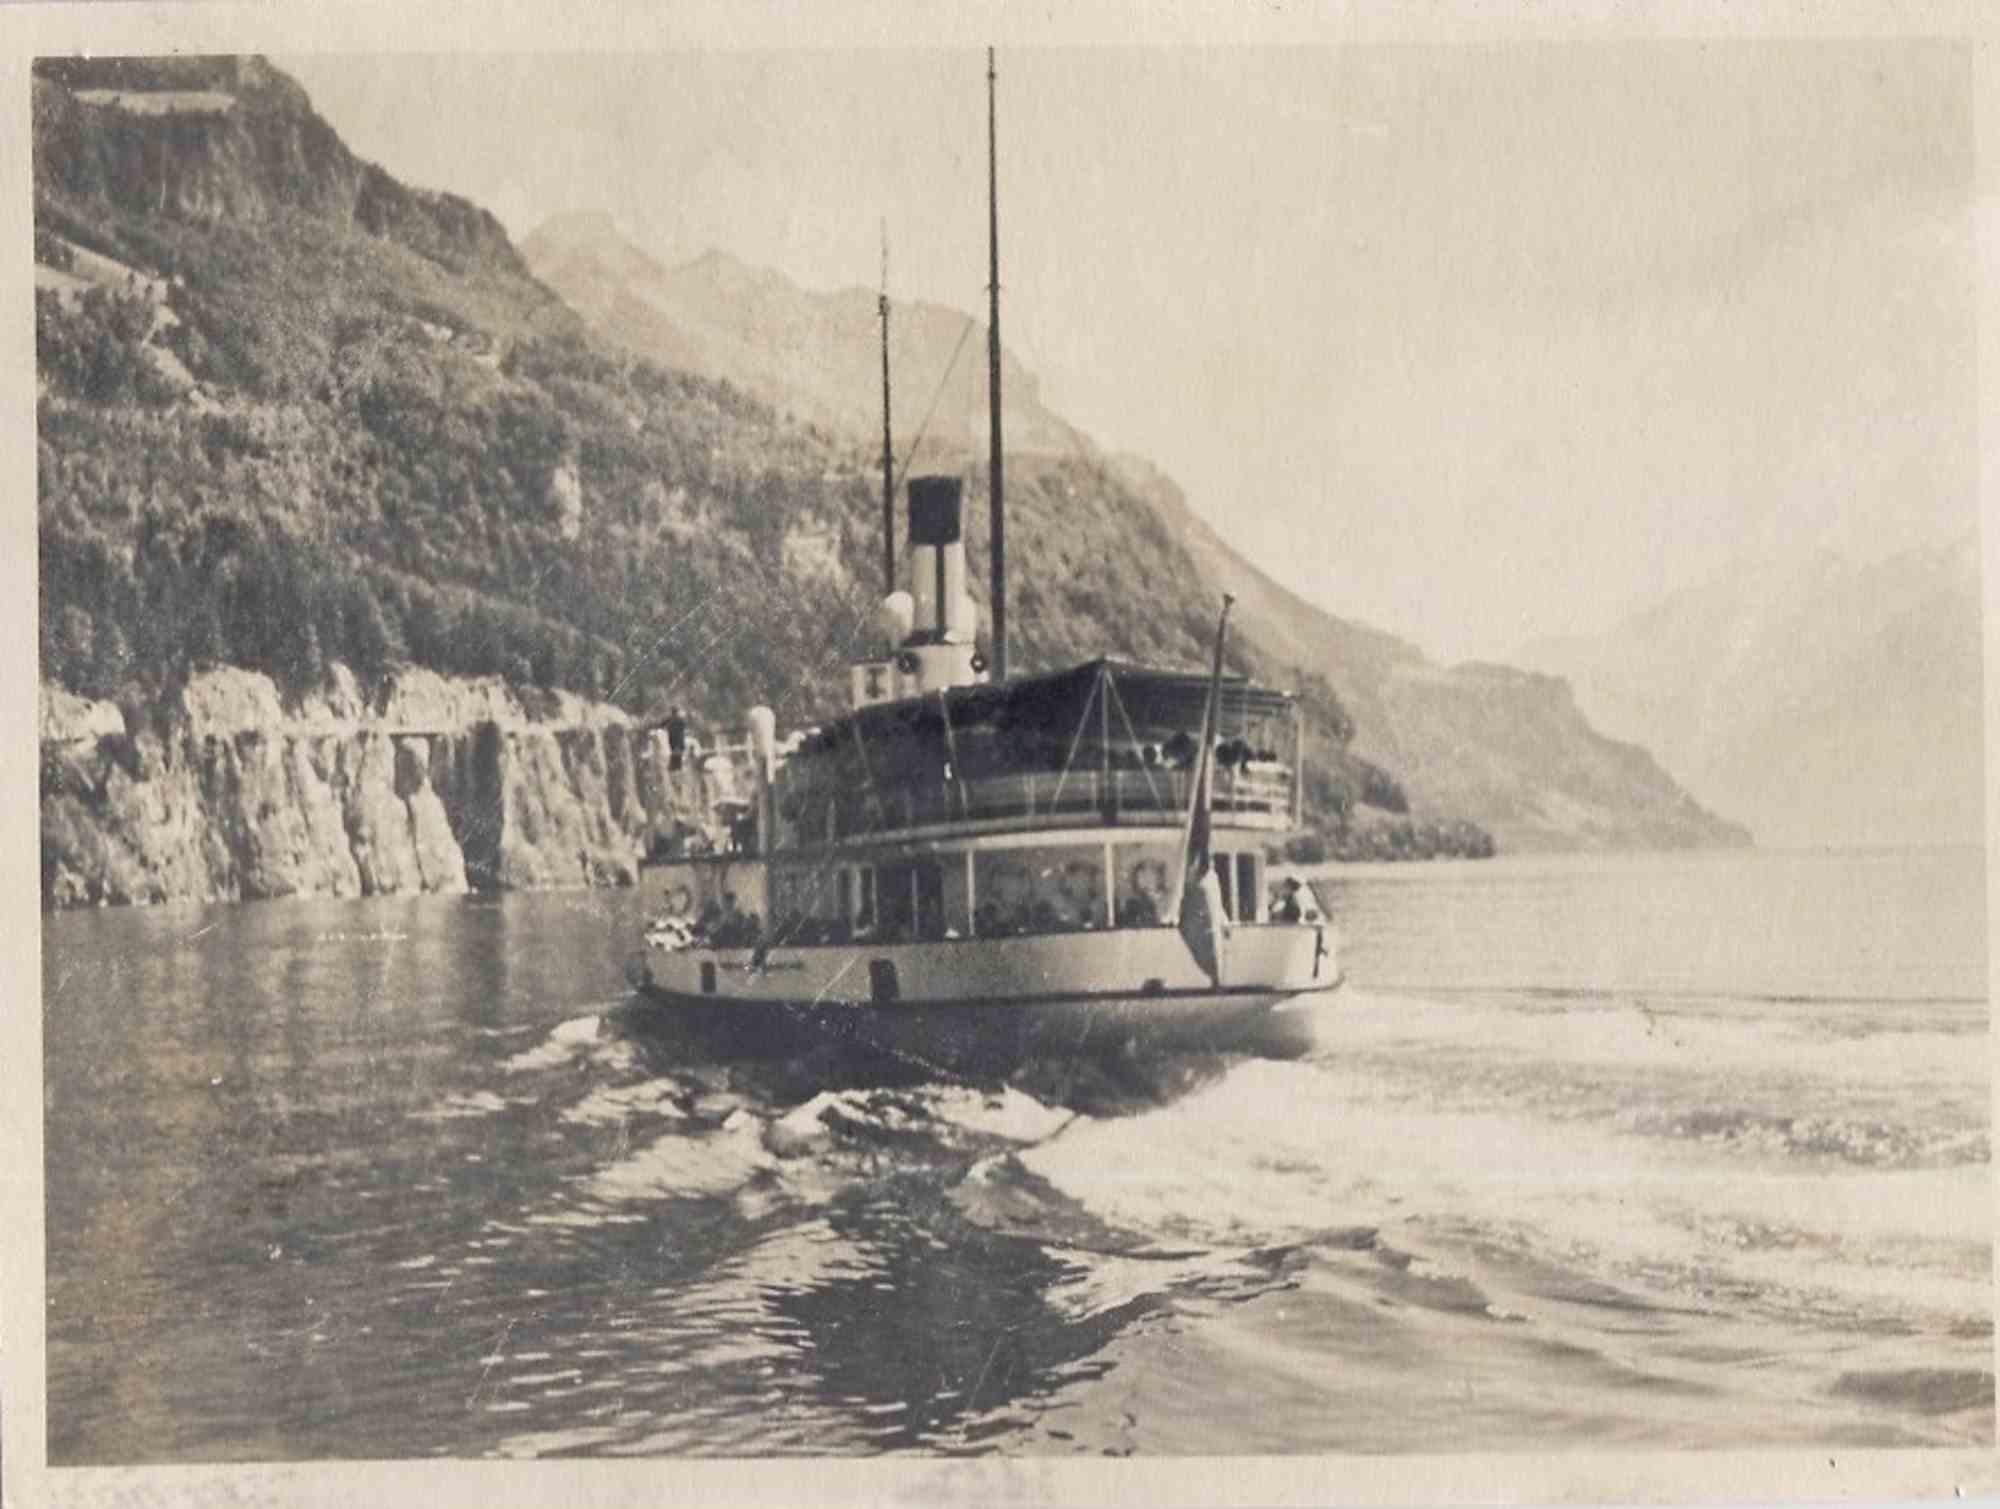 Unknown Figurative Photograph - Old Days Photo - The Boat - Vintage Photo - Mid-20th Century